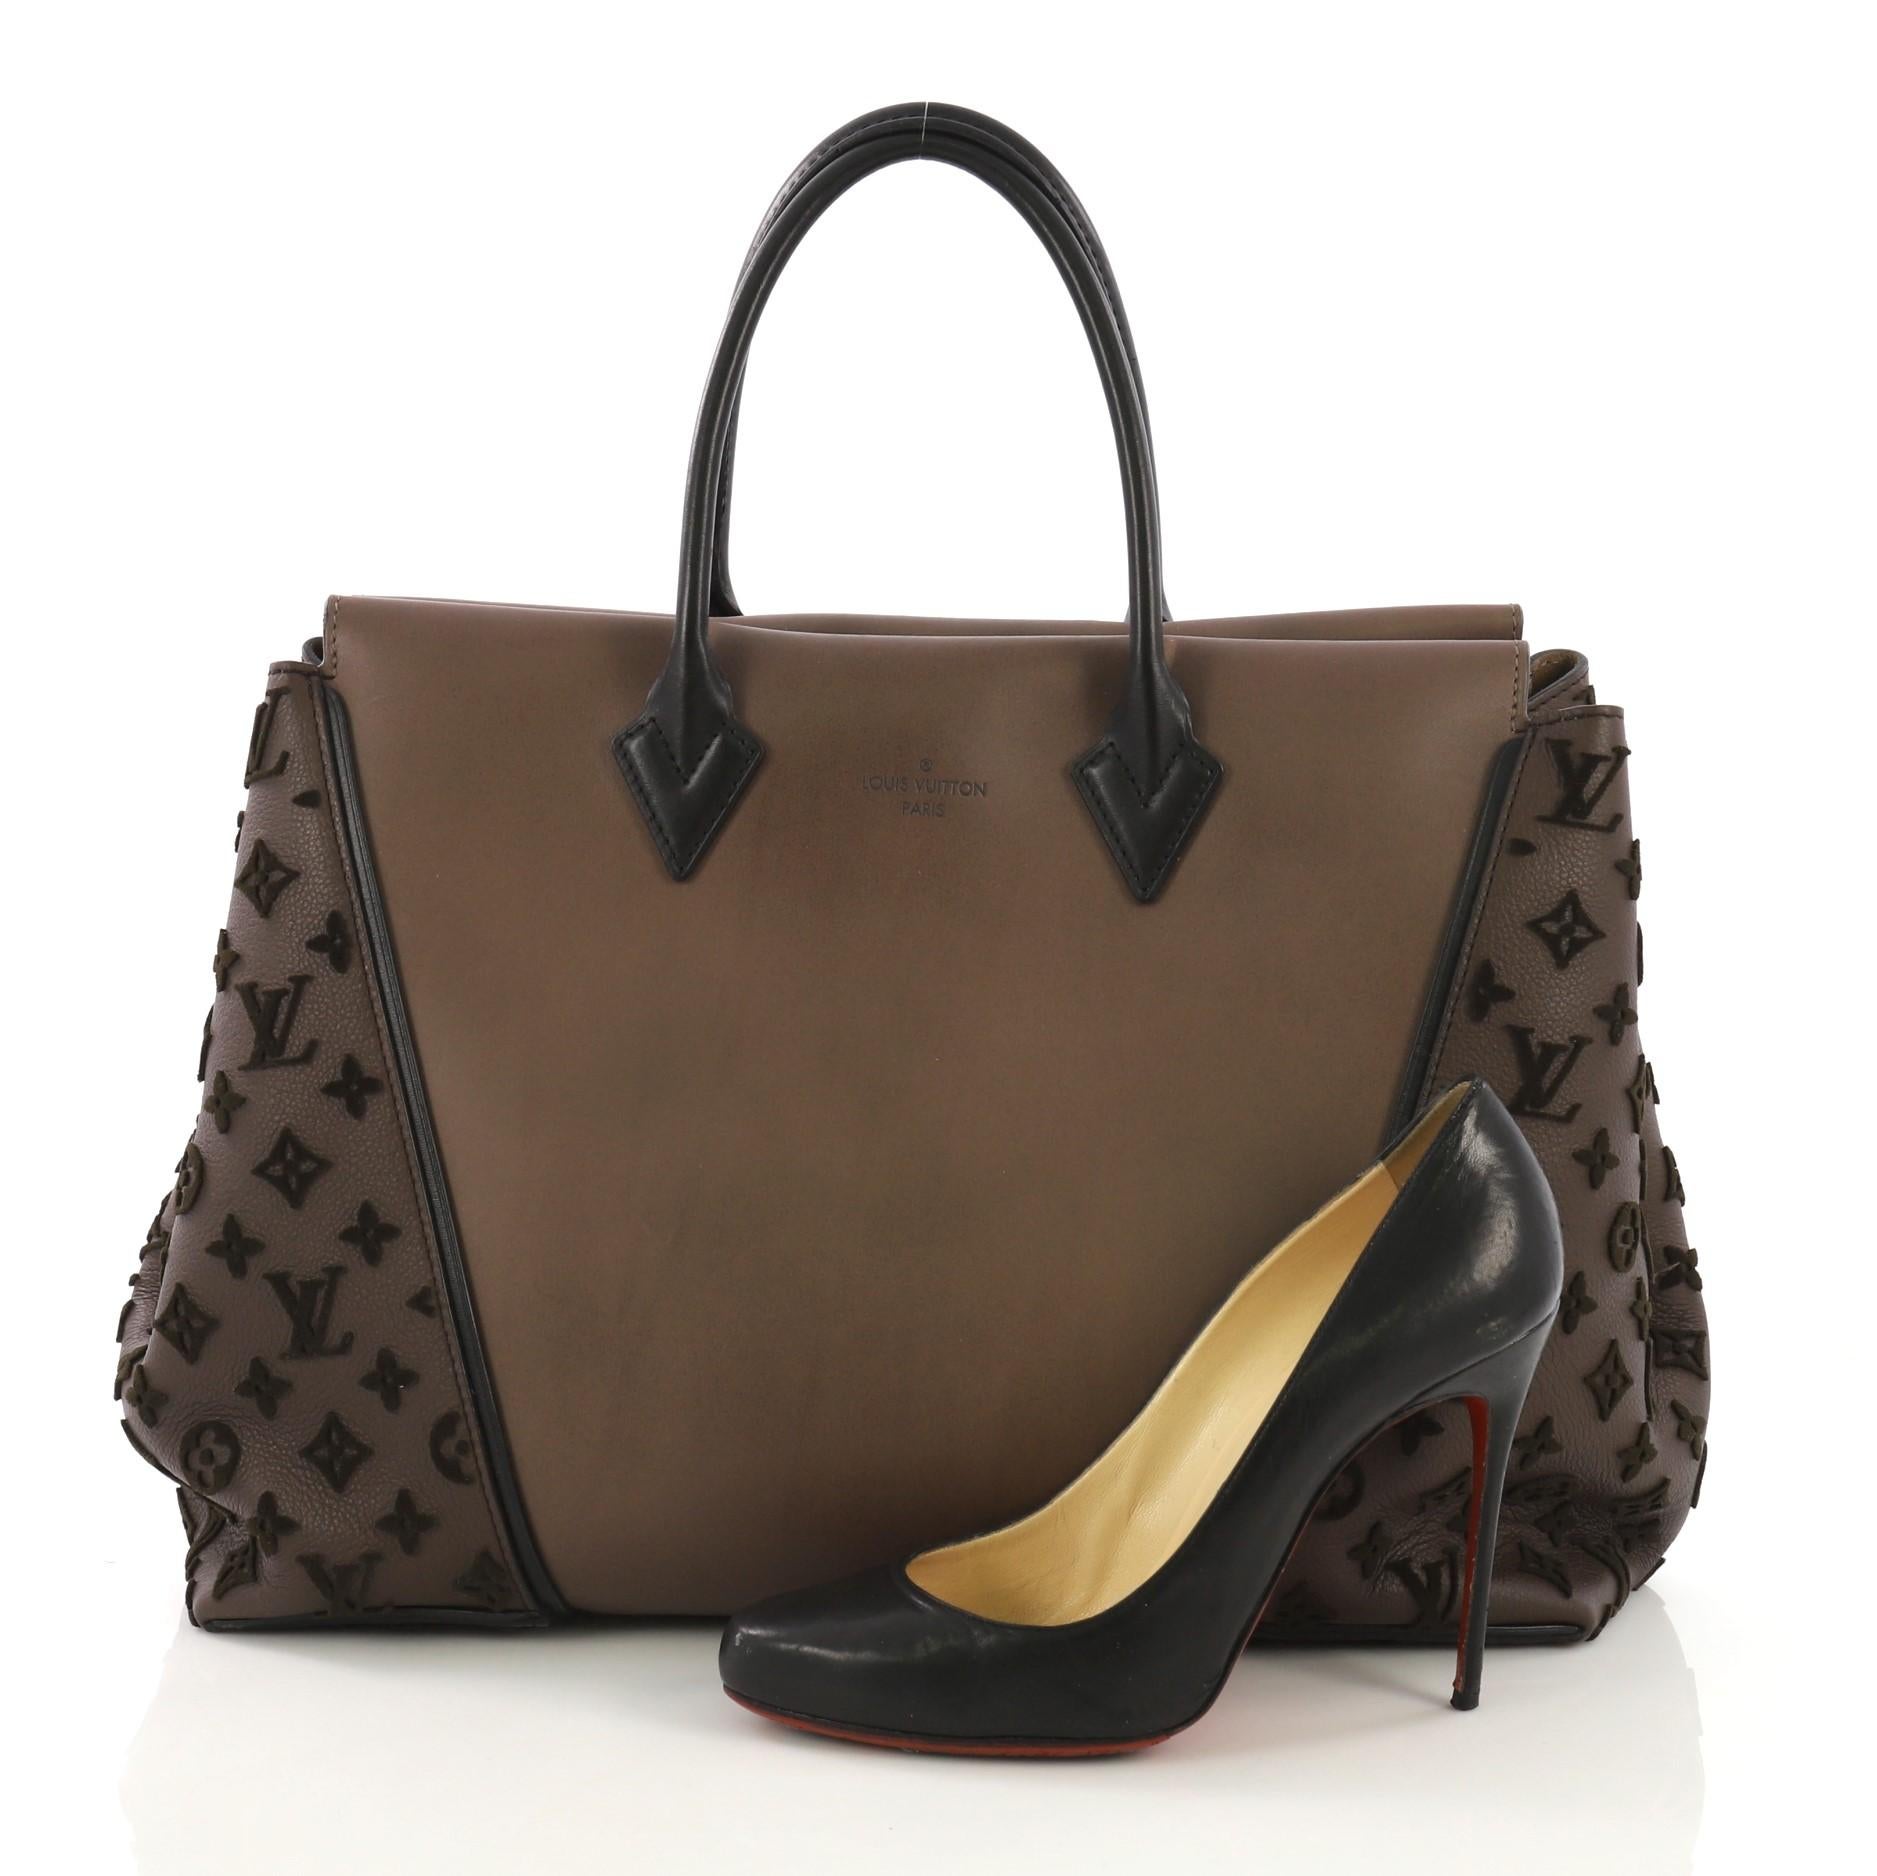 This Louis Vuitton W Tote Cuir Orfevre and Veau Cachemire GM, crafted brown cuir orfevre leather and veau cachemire leather, features dual rolled handles, expansive sides with tufted velvet monogram embossed patterns, protective base studs and